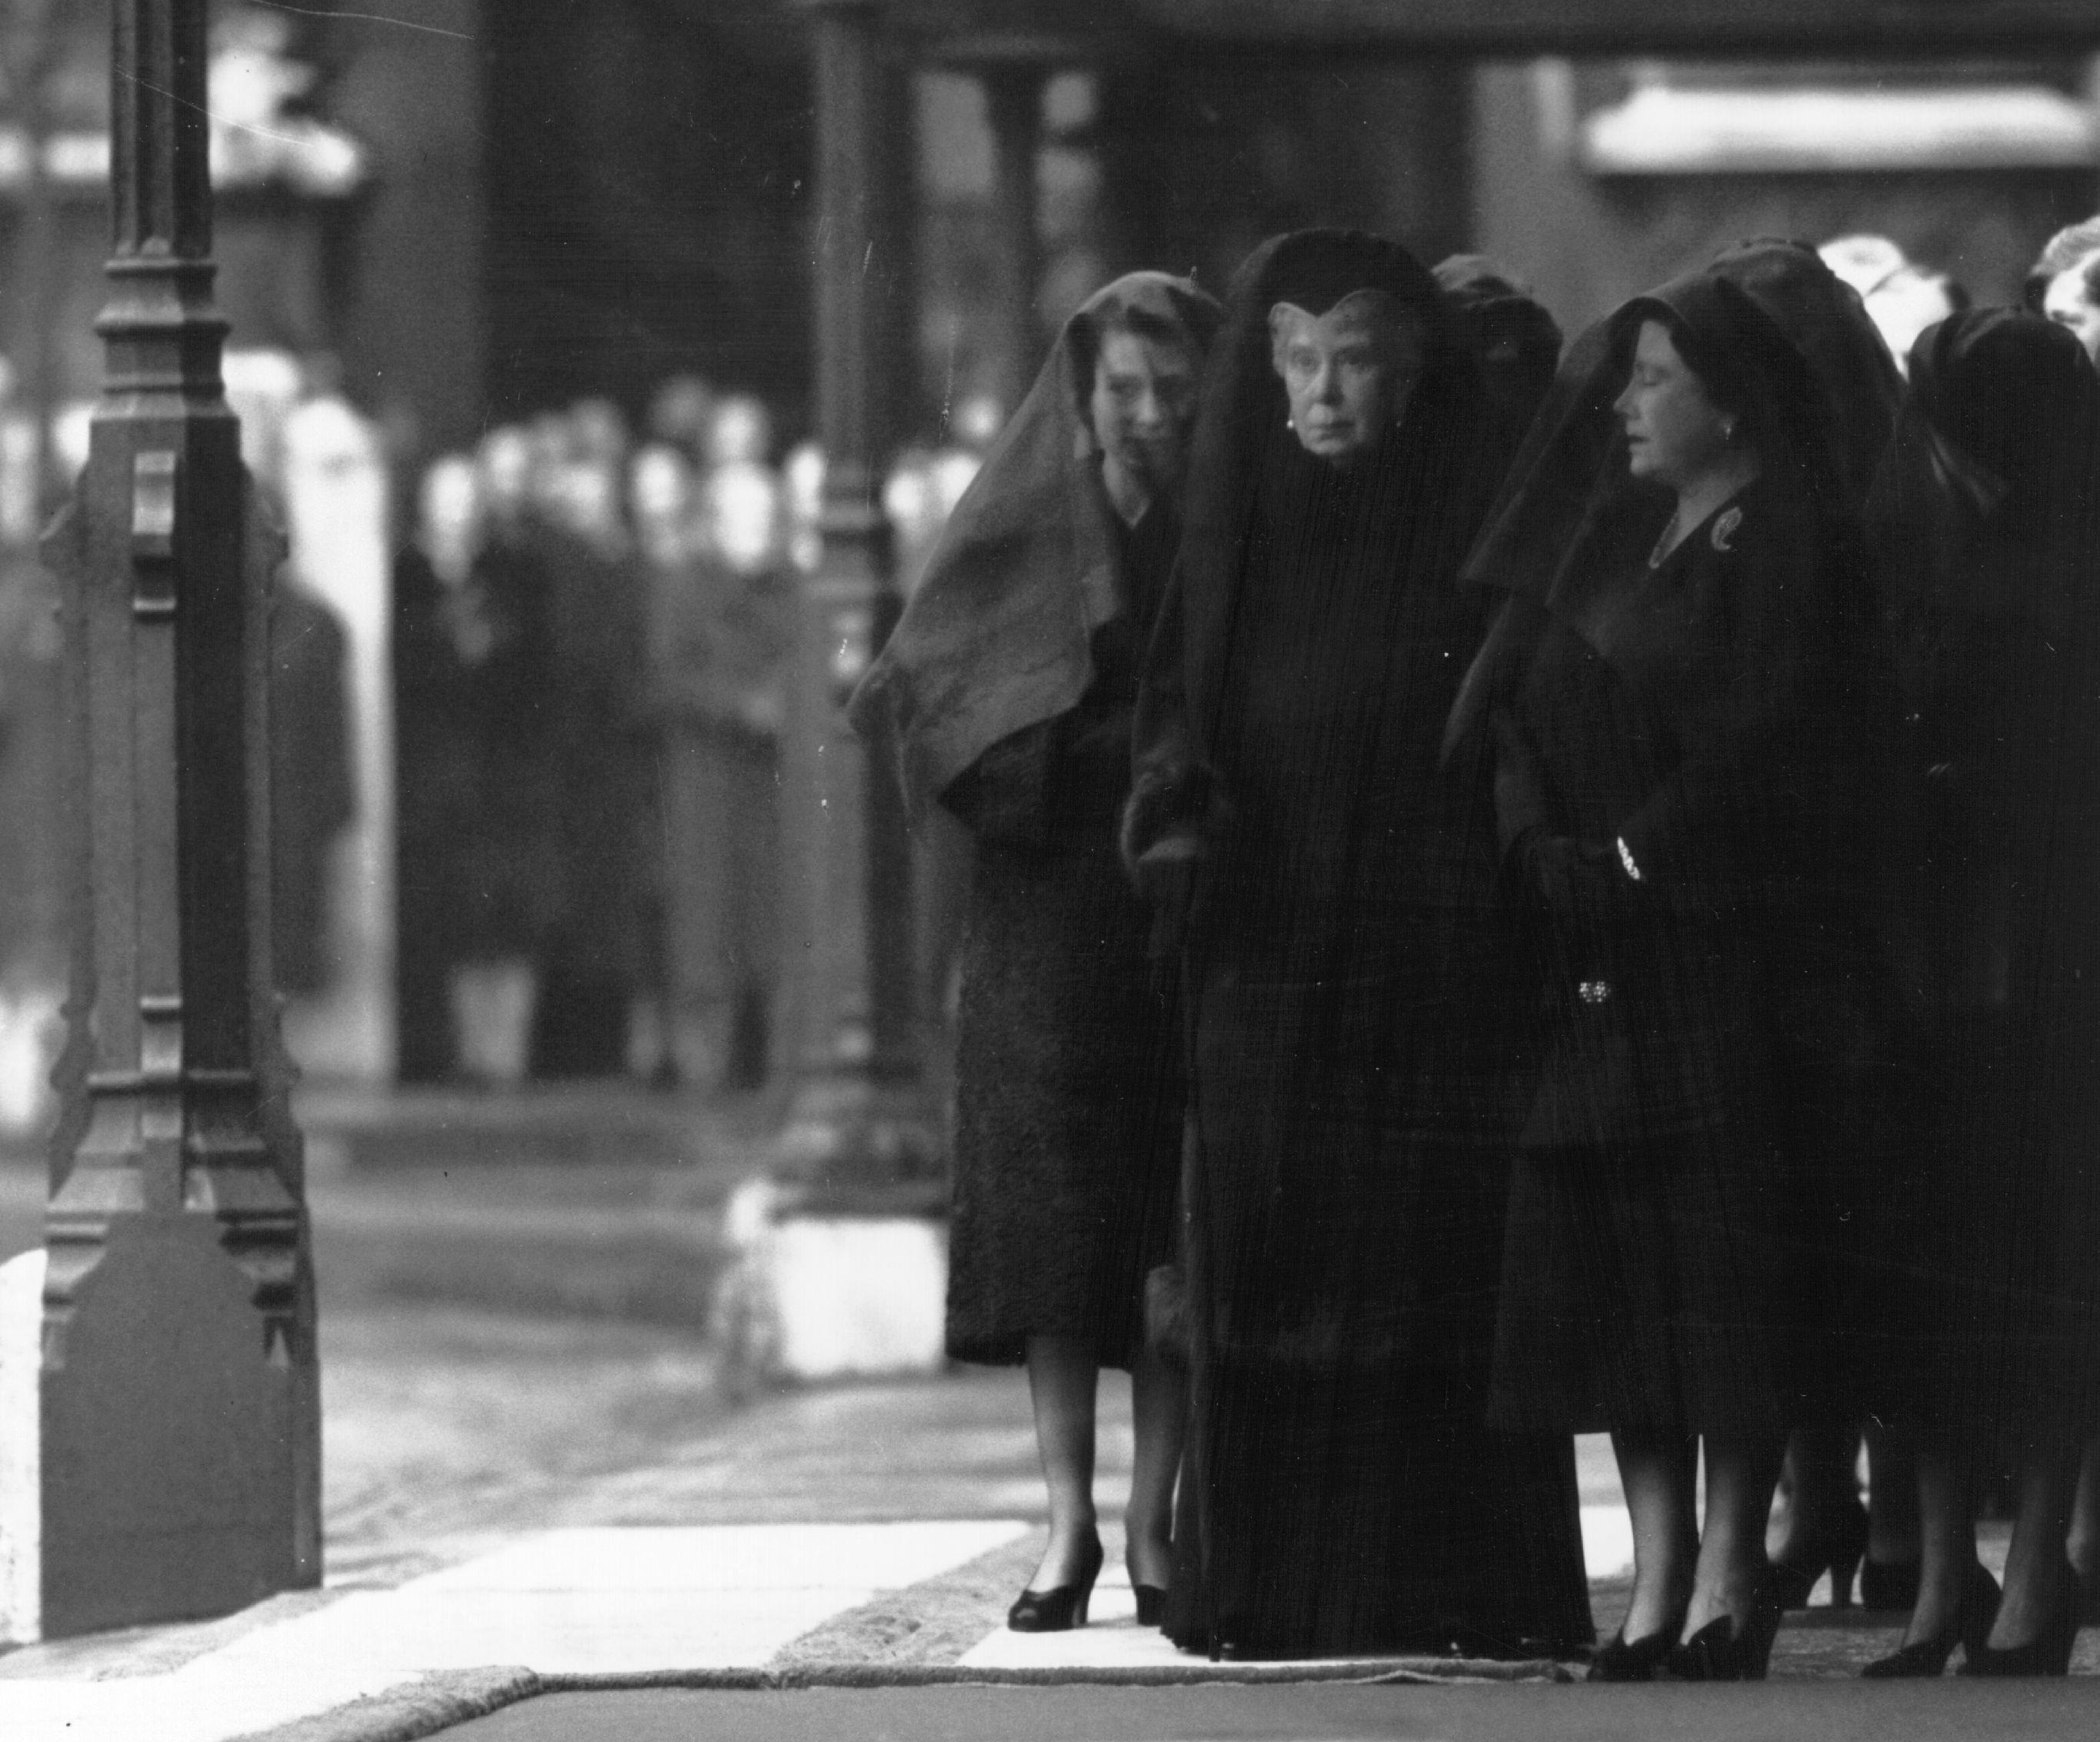 <p>Three queens in mourning -- the new Queen Elizabeth II, her widowed mother, Queen Elizabeth the Queen Mother, and her paternal grandmother, Queen Mary -- waited at London King's Cross railway station for the arrival of the special train bringing the coffin of King George VI from Sandringham on Feb. 11, 1952, ahead of <a href="https://www.wonderwall.com/celebrity/royal-funerals-through-the-decades-photos-princess-diana-margaret-queen-elizabeth-queen-mother-king-george-prince-philip-monarchs-more-445035.gallery?photoId=445054">his royal funeral</a>.</p>